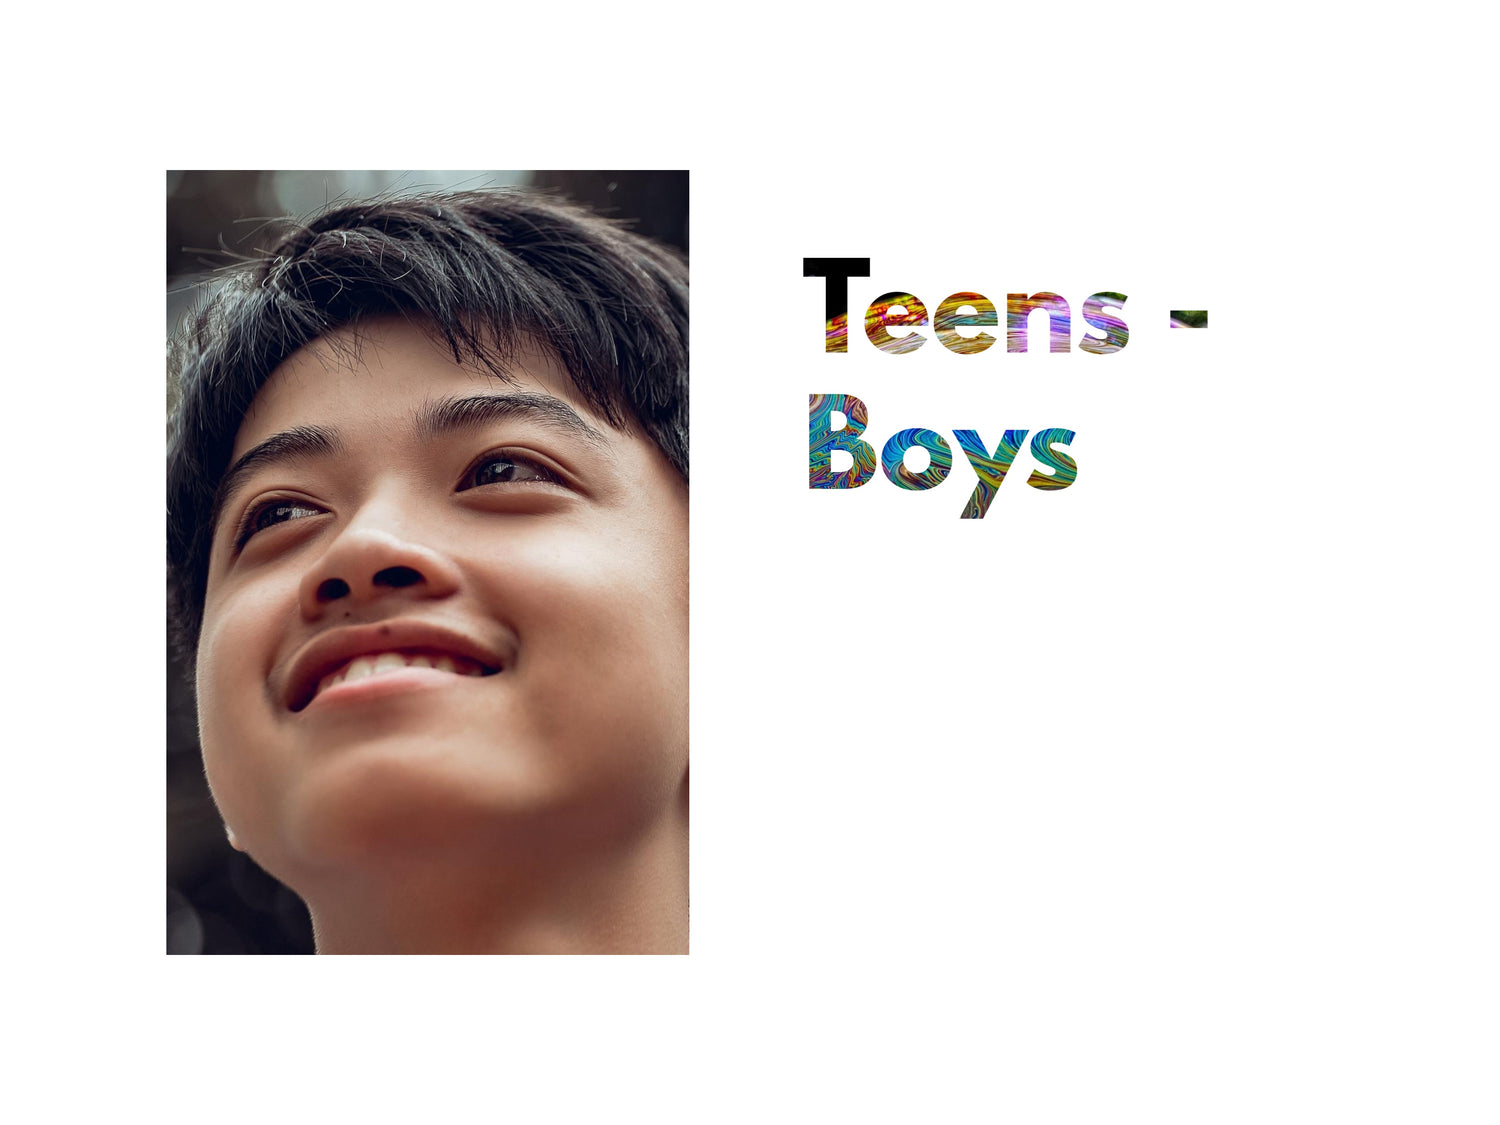 Teens - Boys Clothing Accessories